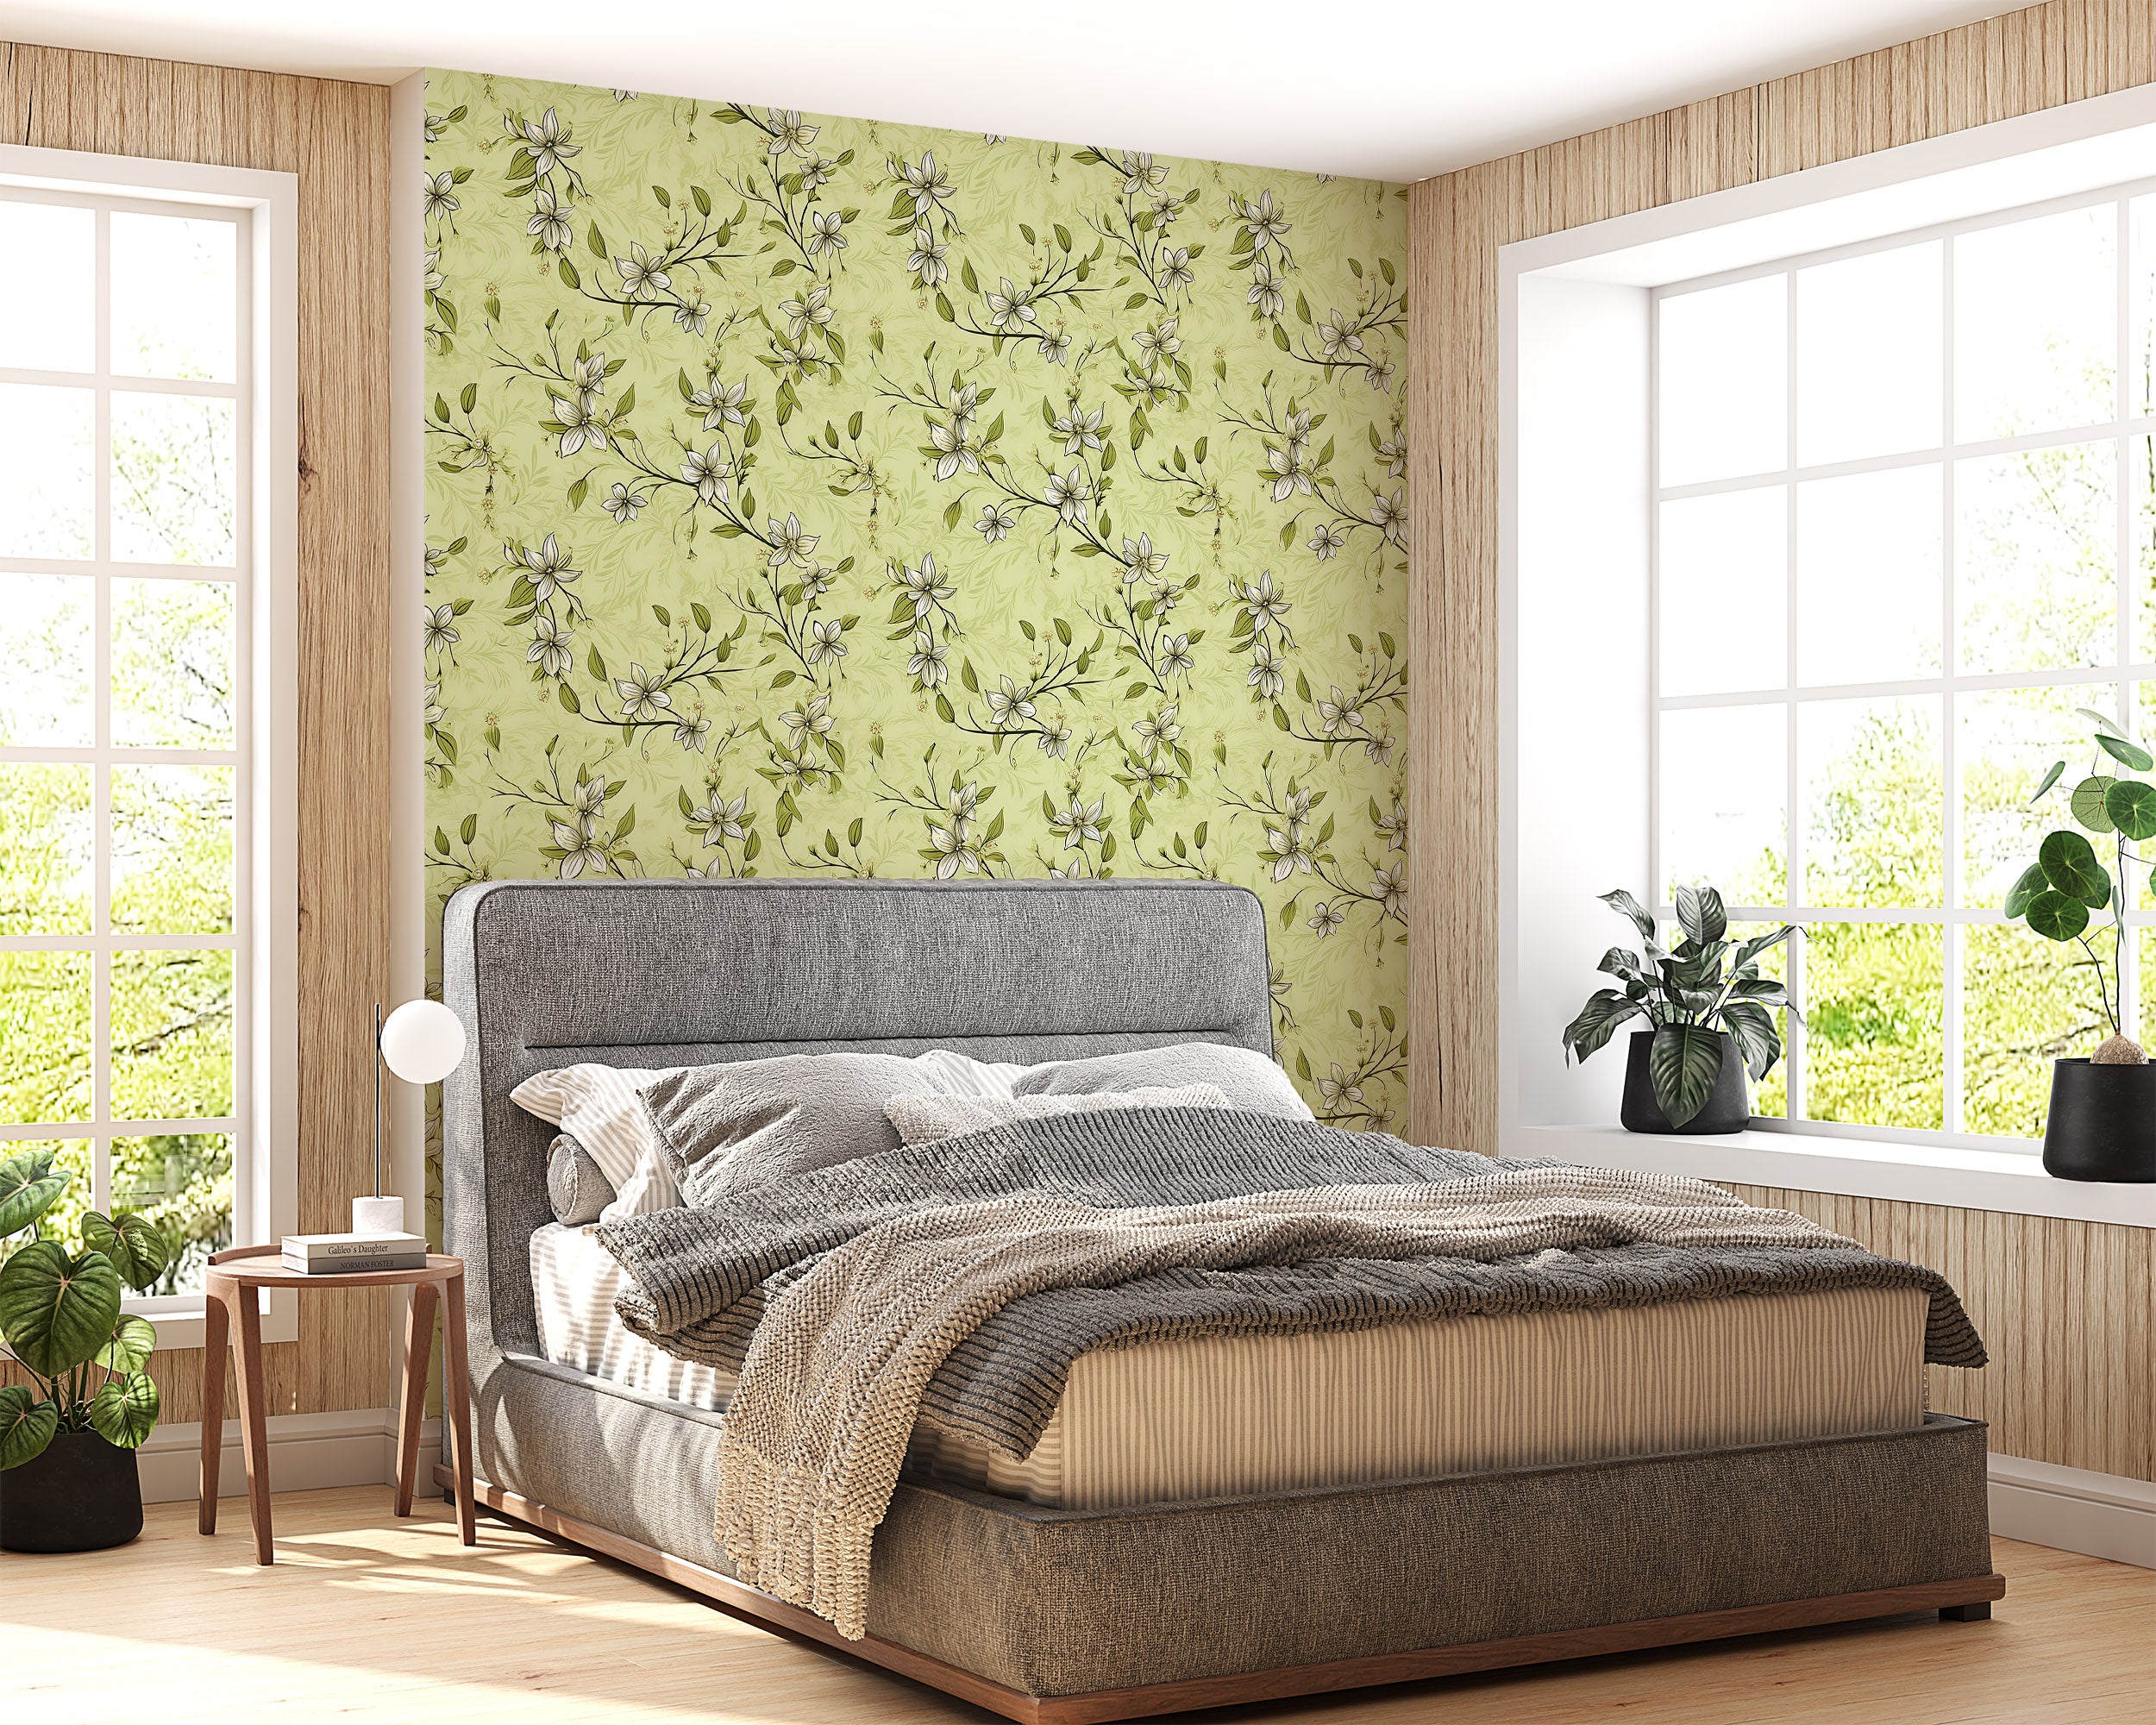 PVC-Free Pistachio Green Floral Wall Covering